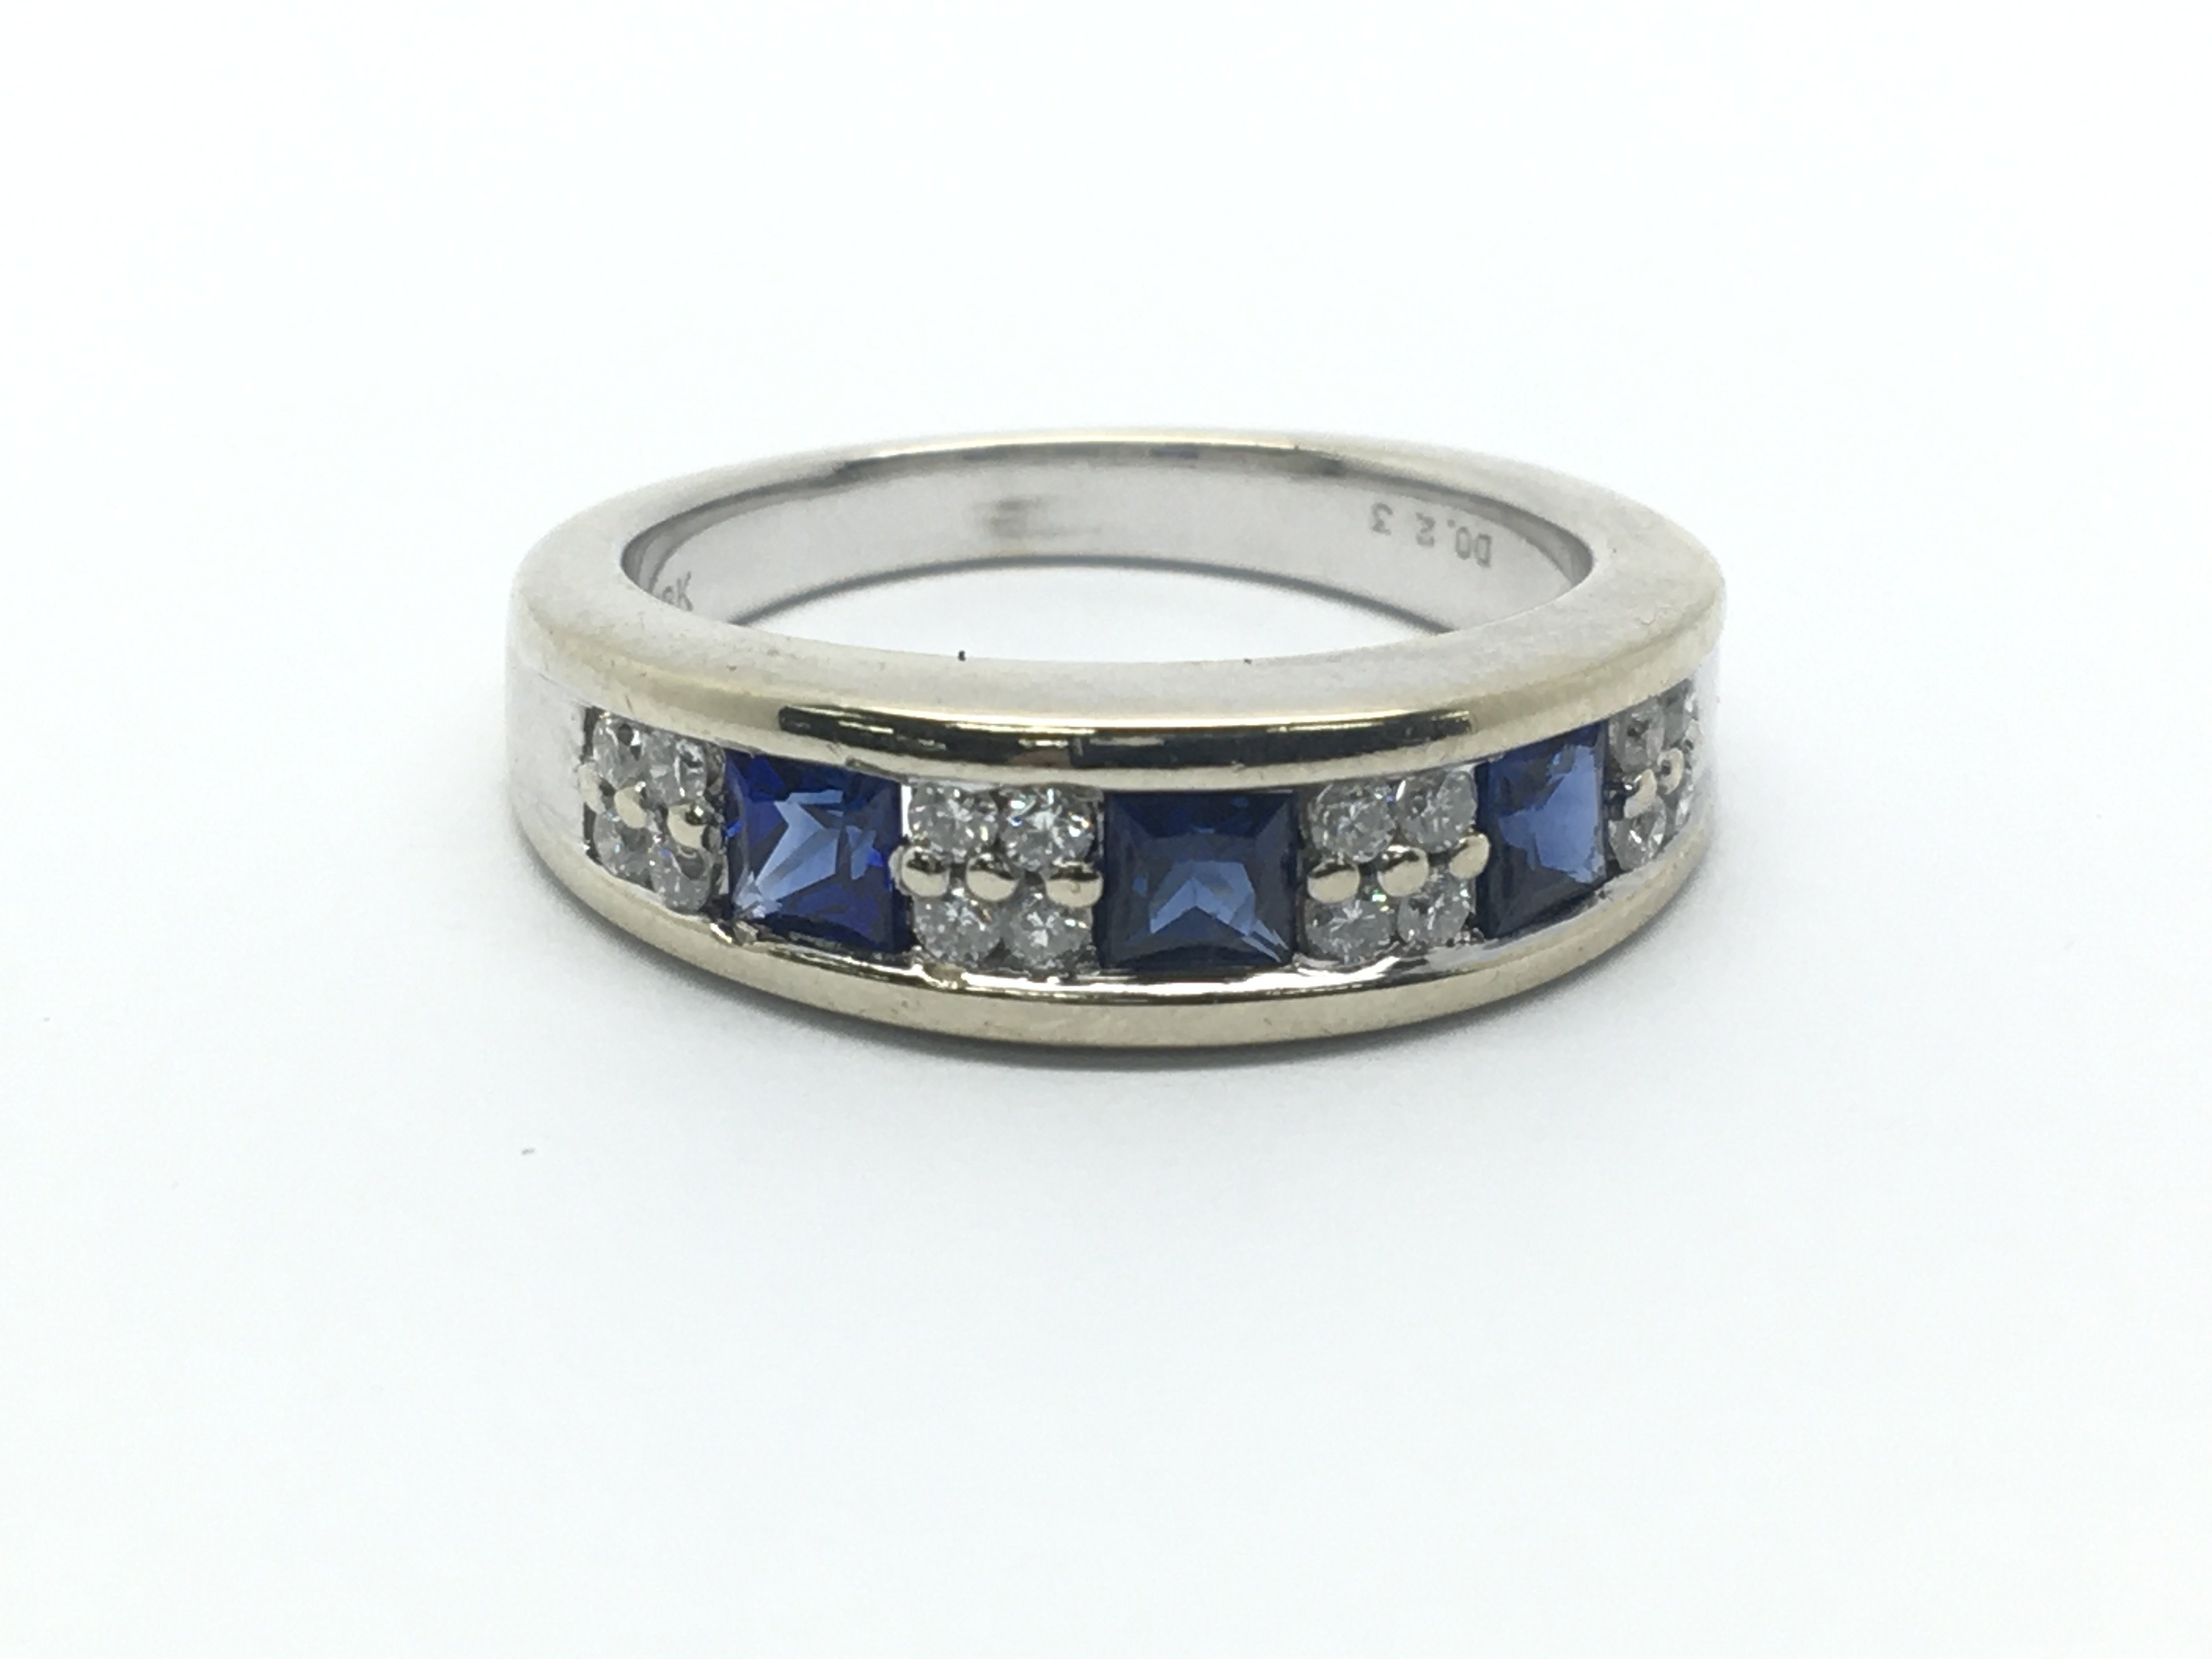 An 18ct white gold, diamond and sapphire ring, diamonds approx 0.23ct, ring size approx L/M